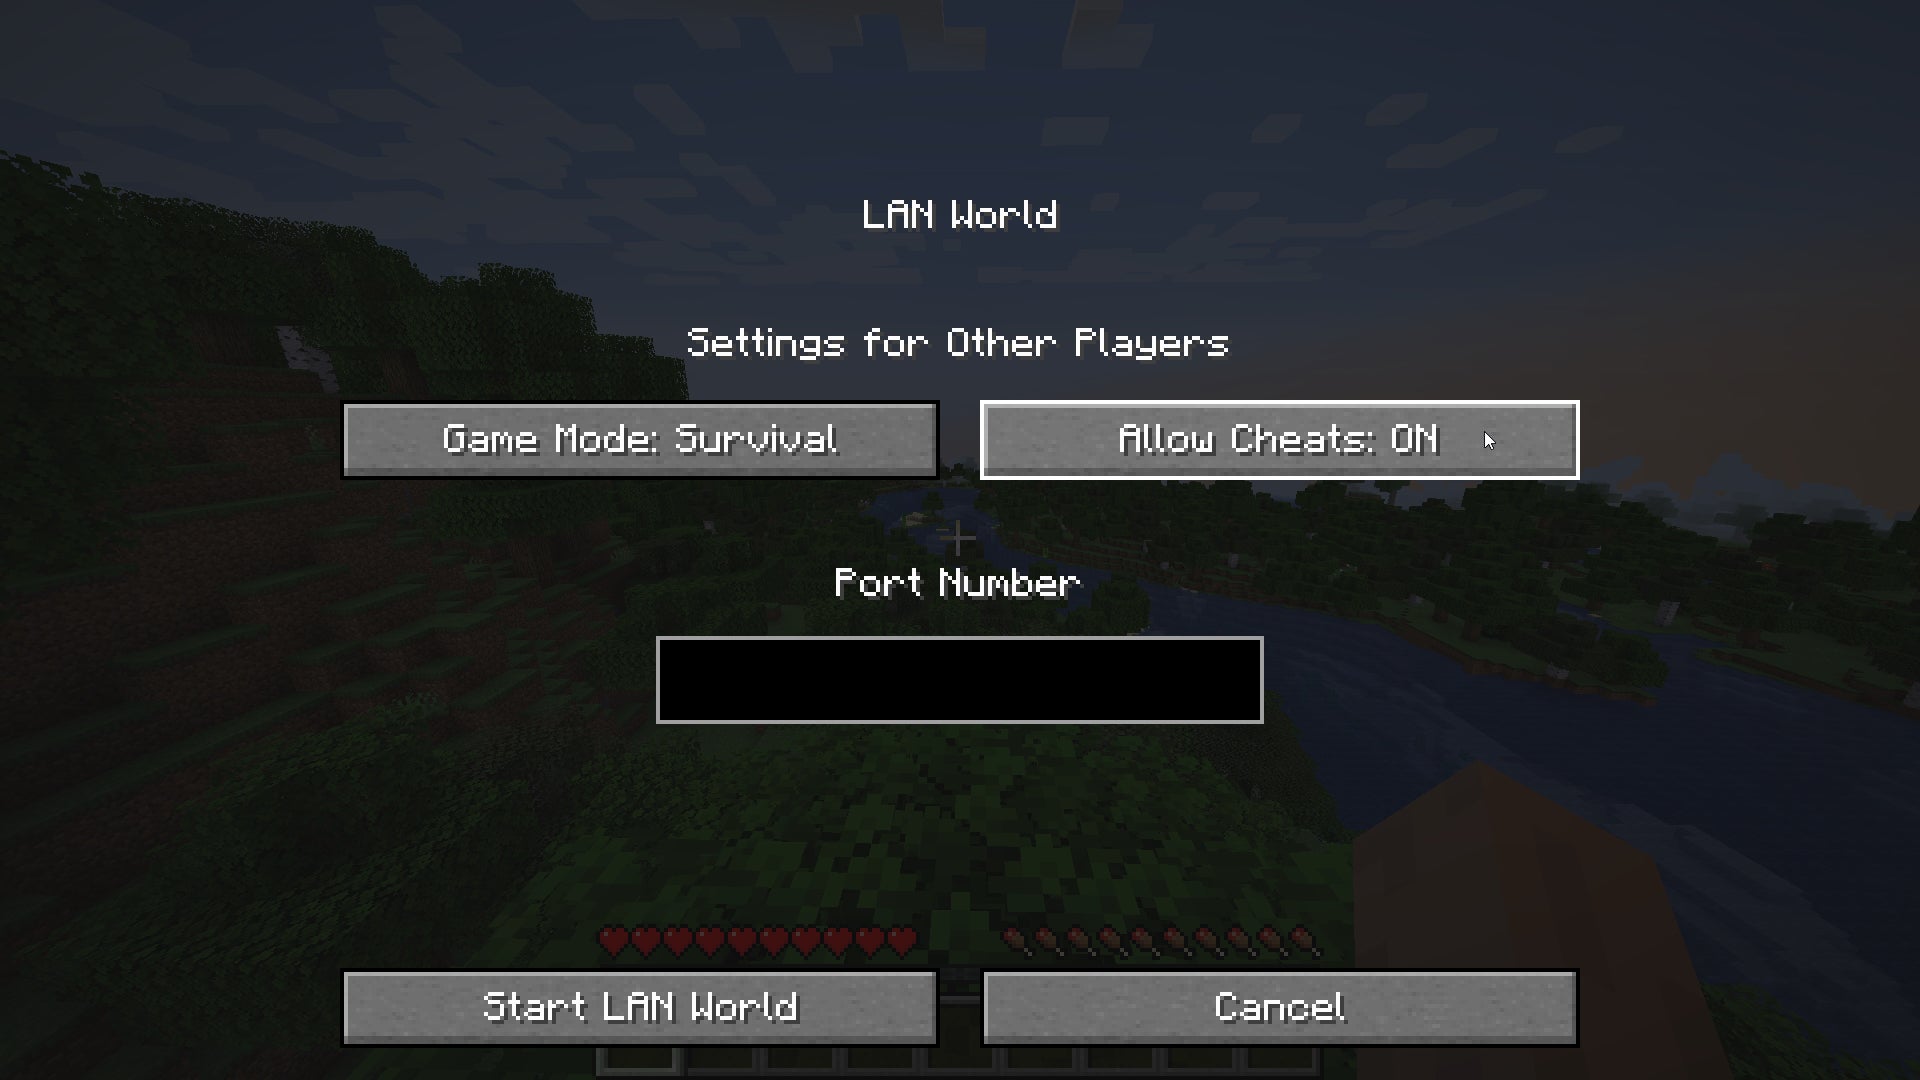 The LAN settings menu in Minecraft, where the player can open the game up to LAN and enable cheats.